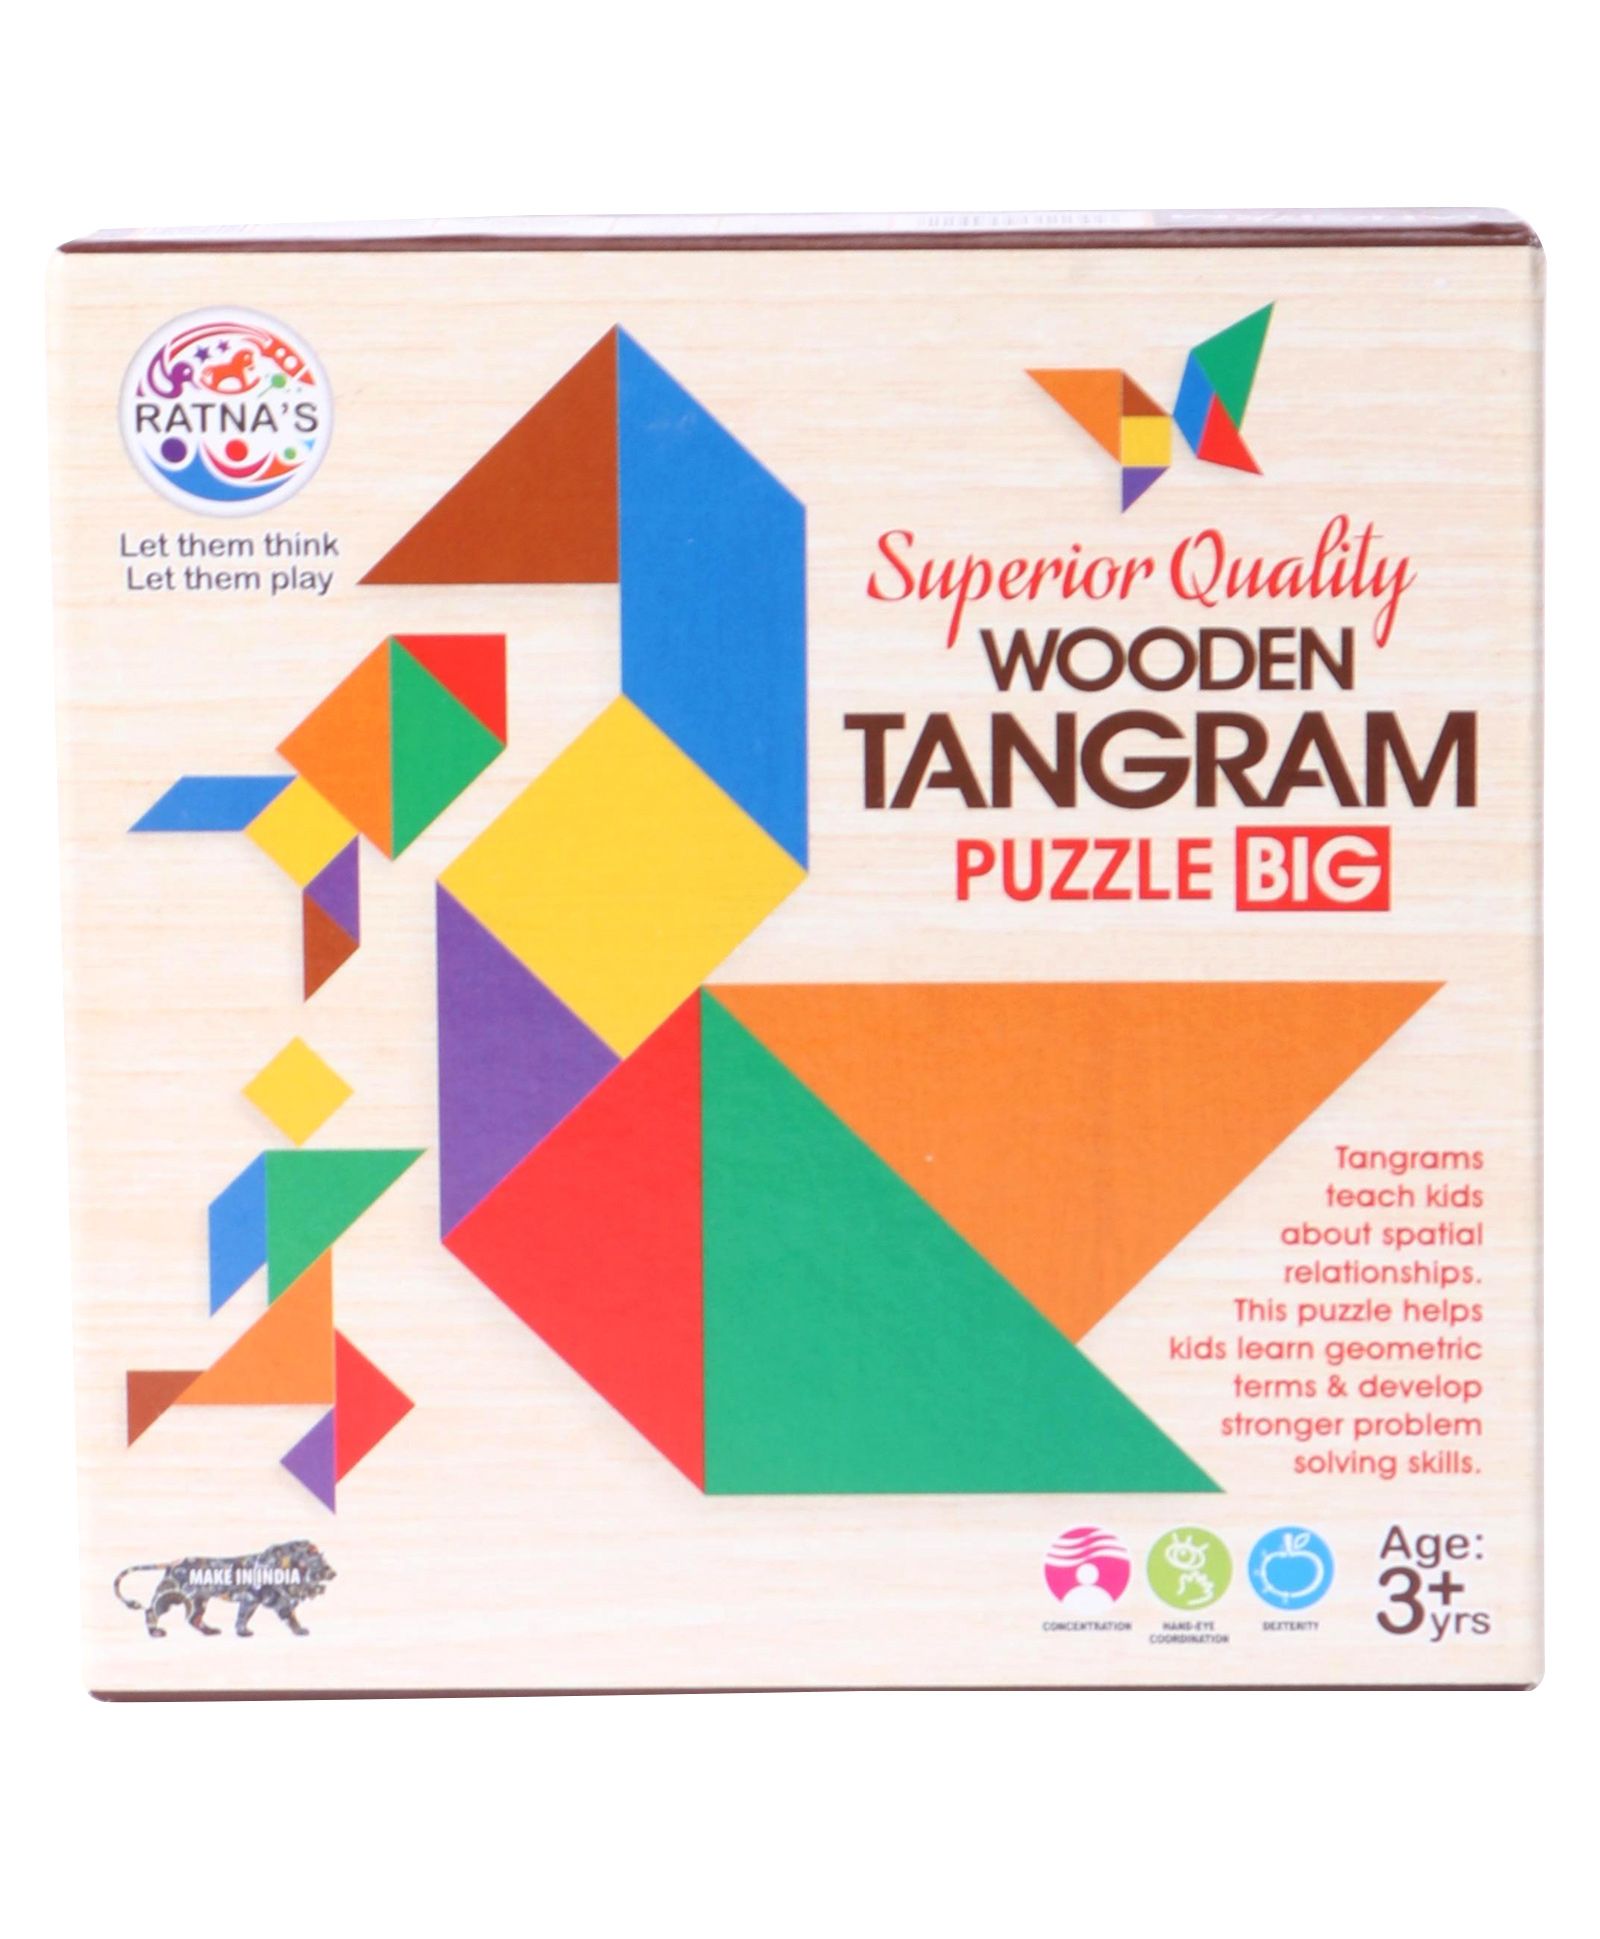 Ratnas Wooden Tangram Puzzle Multicolour 7 Shapes Online India Buy Puzzle Games Toys For 3 6 Years At Firstcry Com